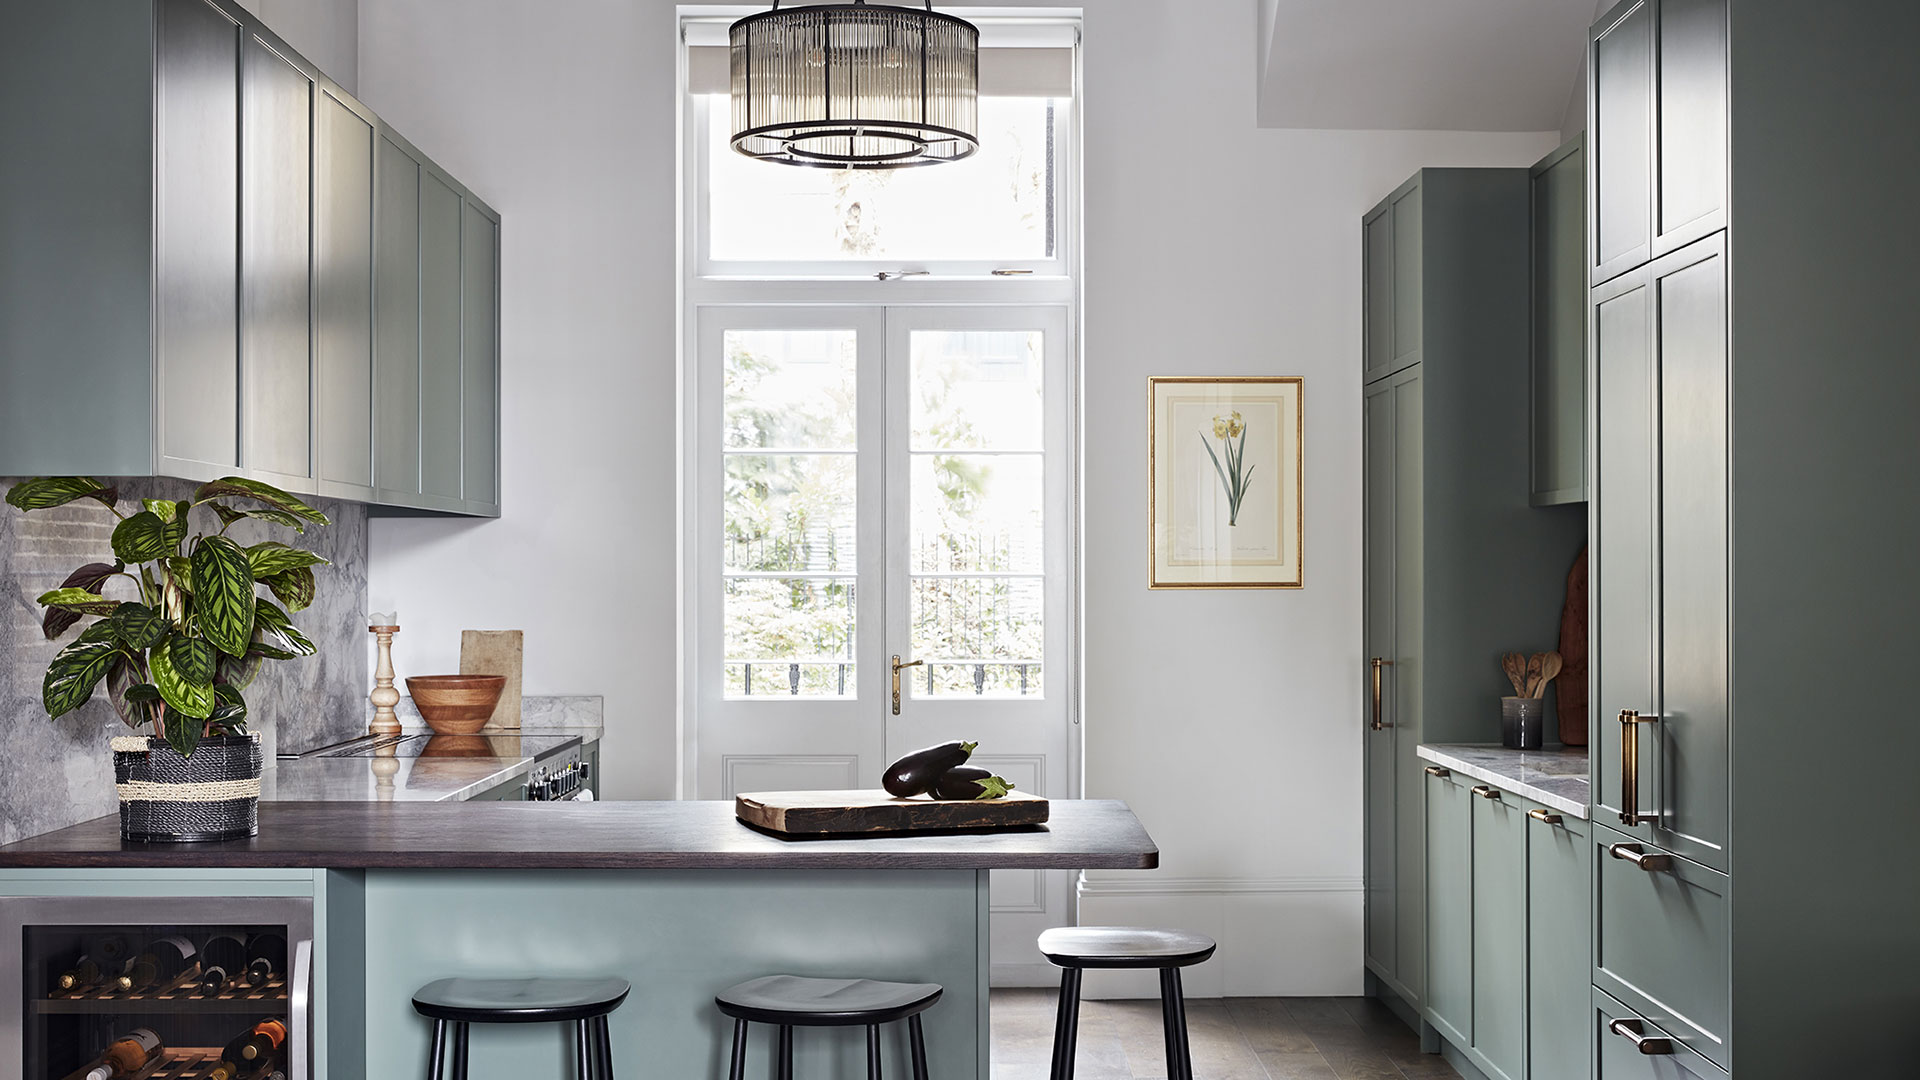 Bespoke kitchen design by Godrich Interiors in hues of grey and duck egg green.